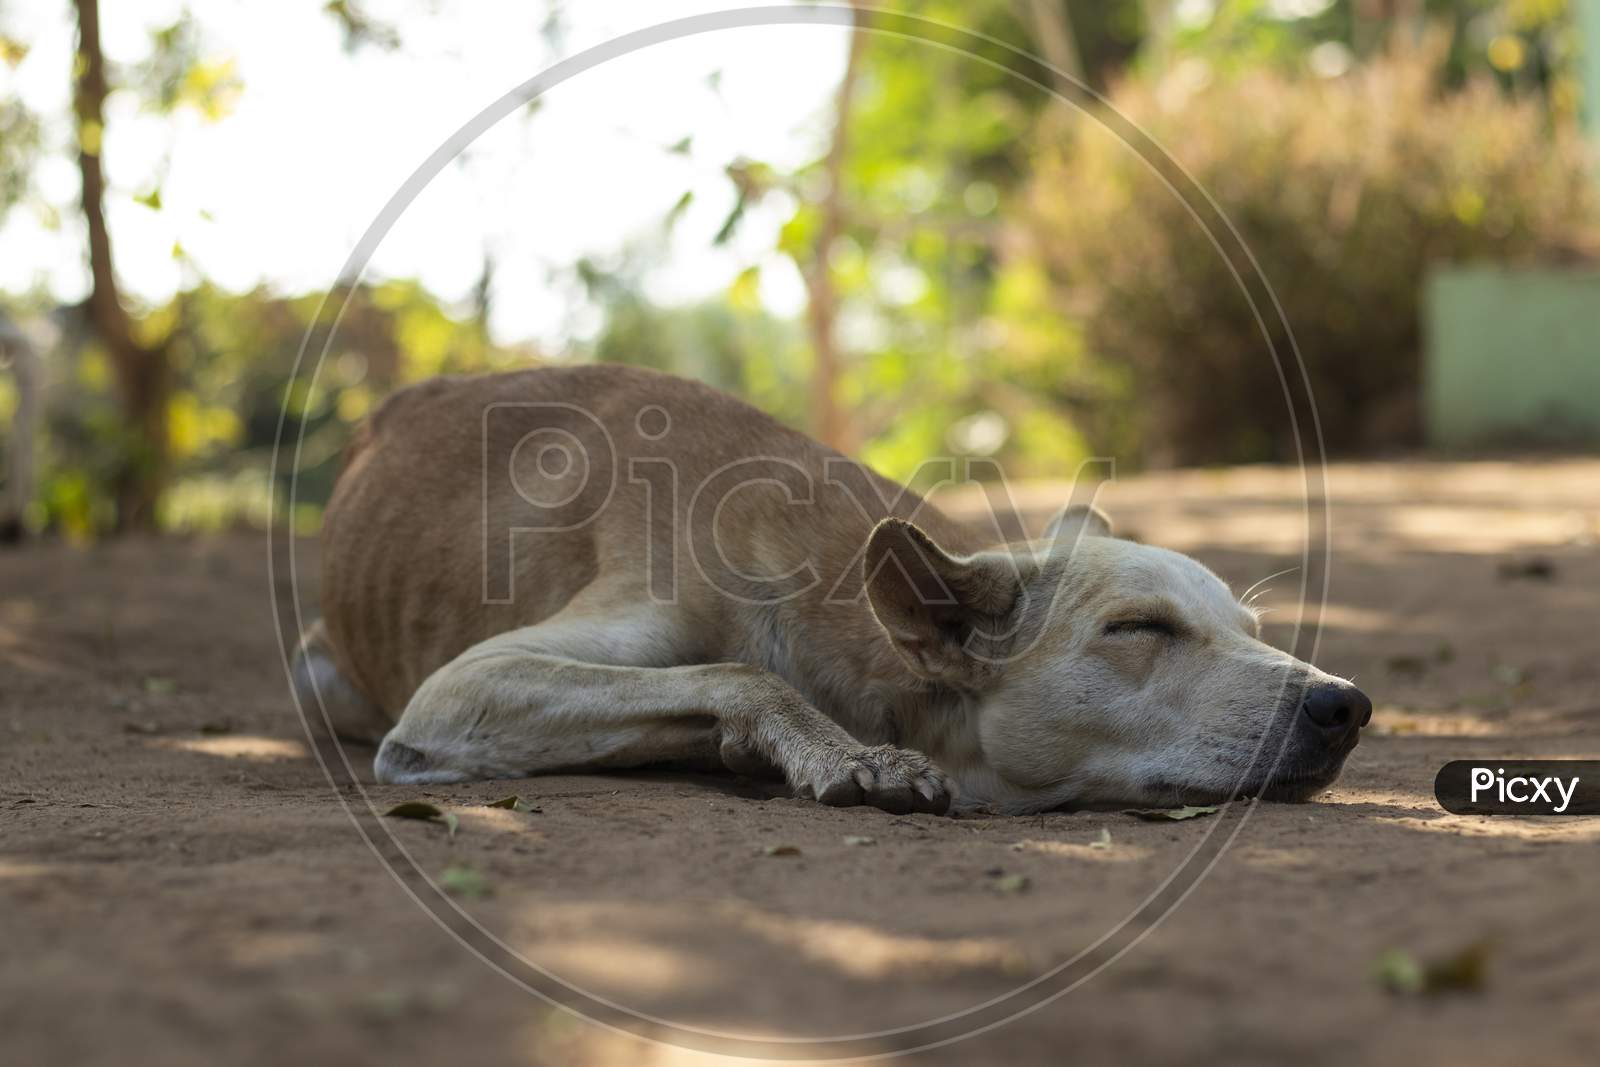 Young White Dog Sleeping With Close Eyes